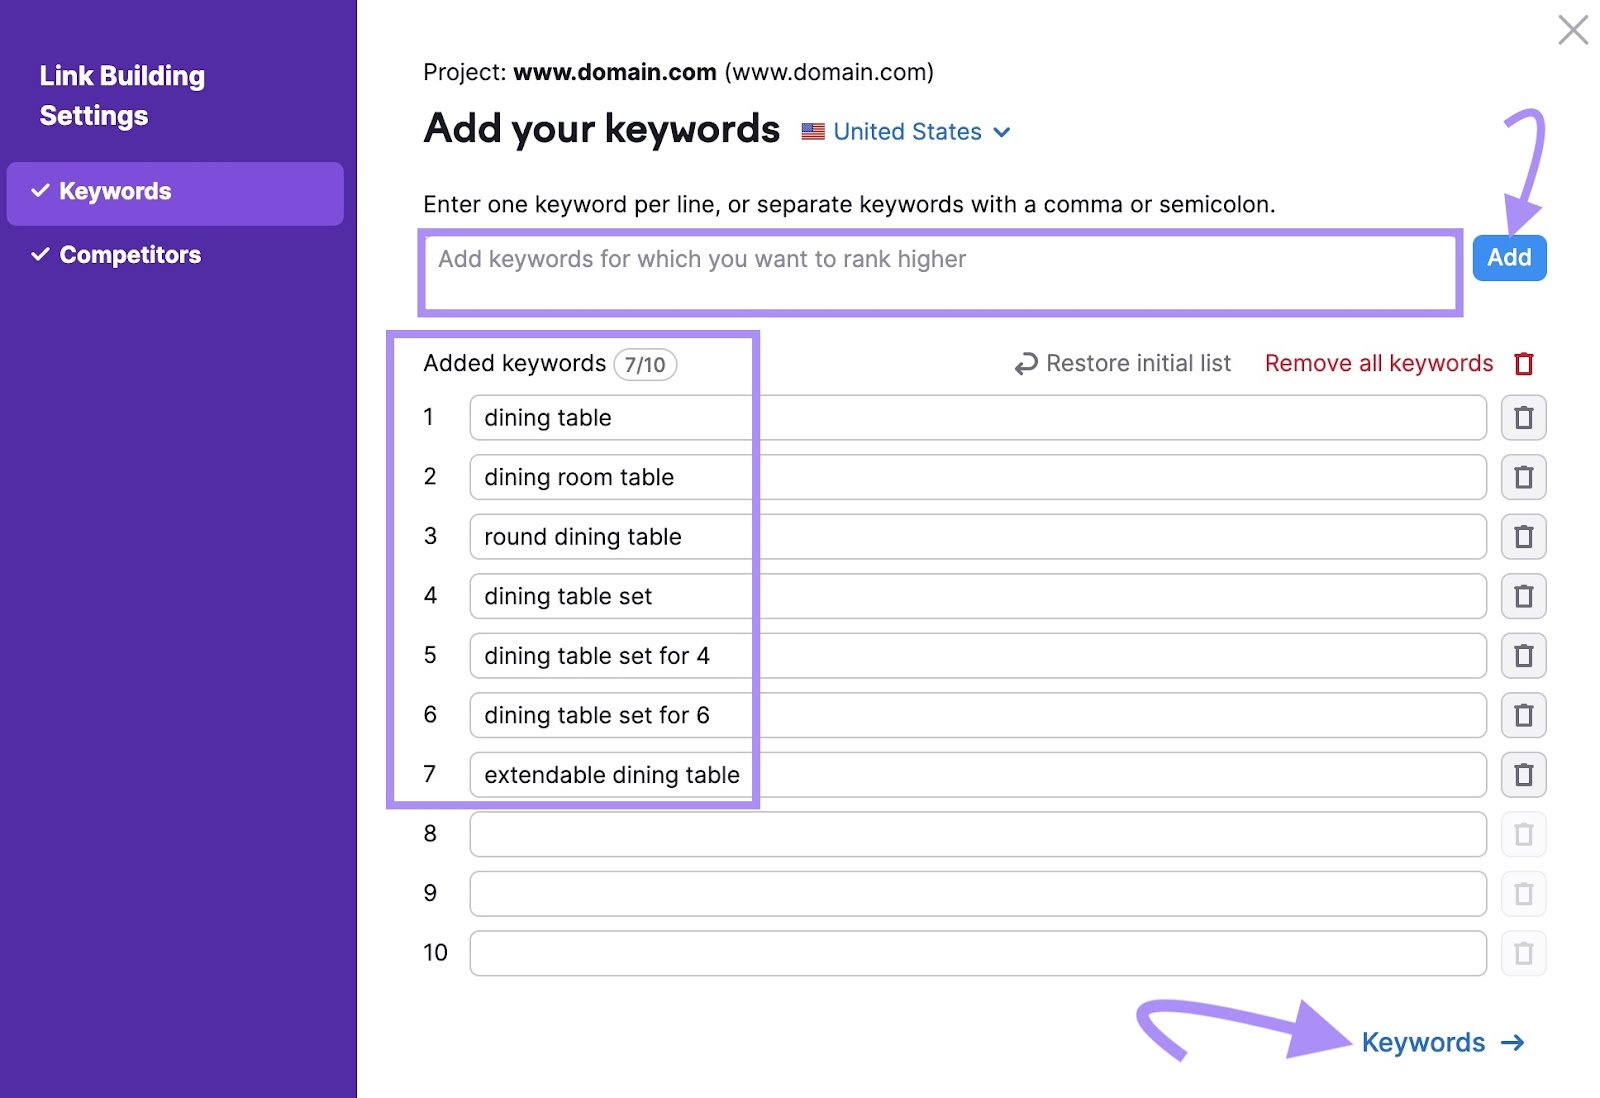 "Add your keywords" model   successful  Link Building Tool settings